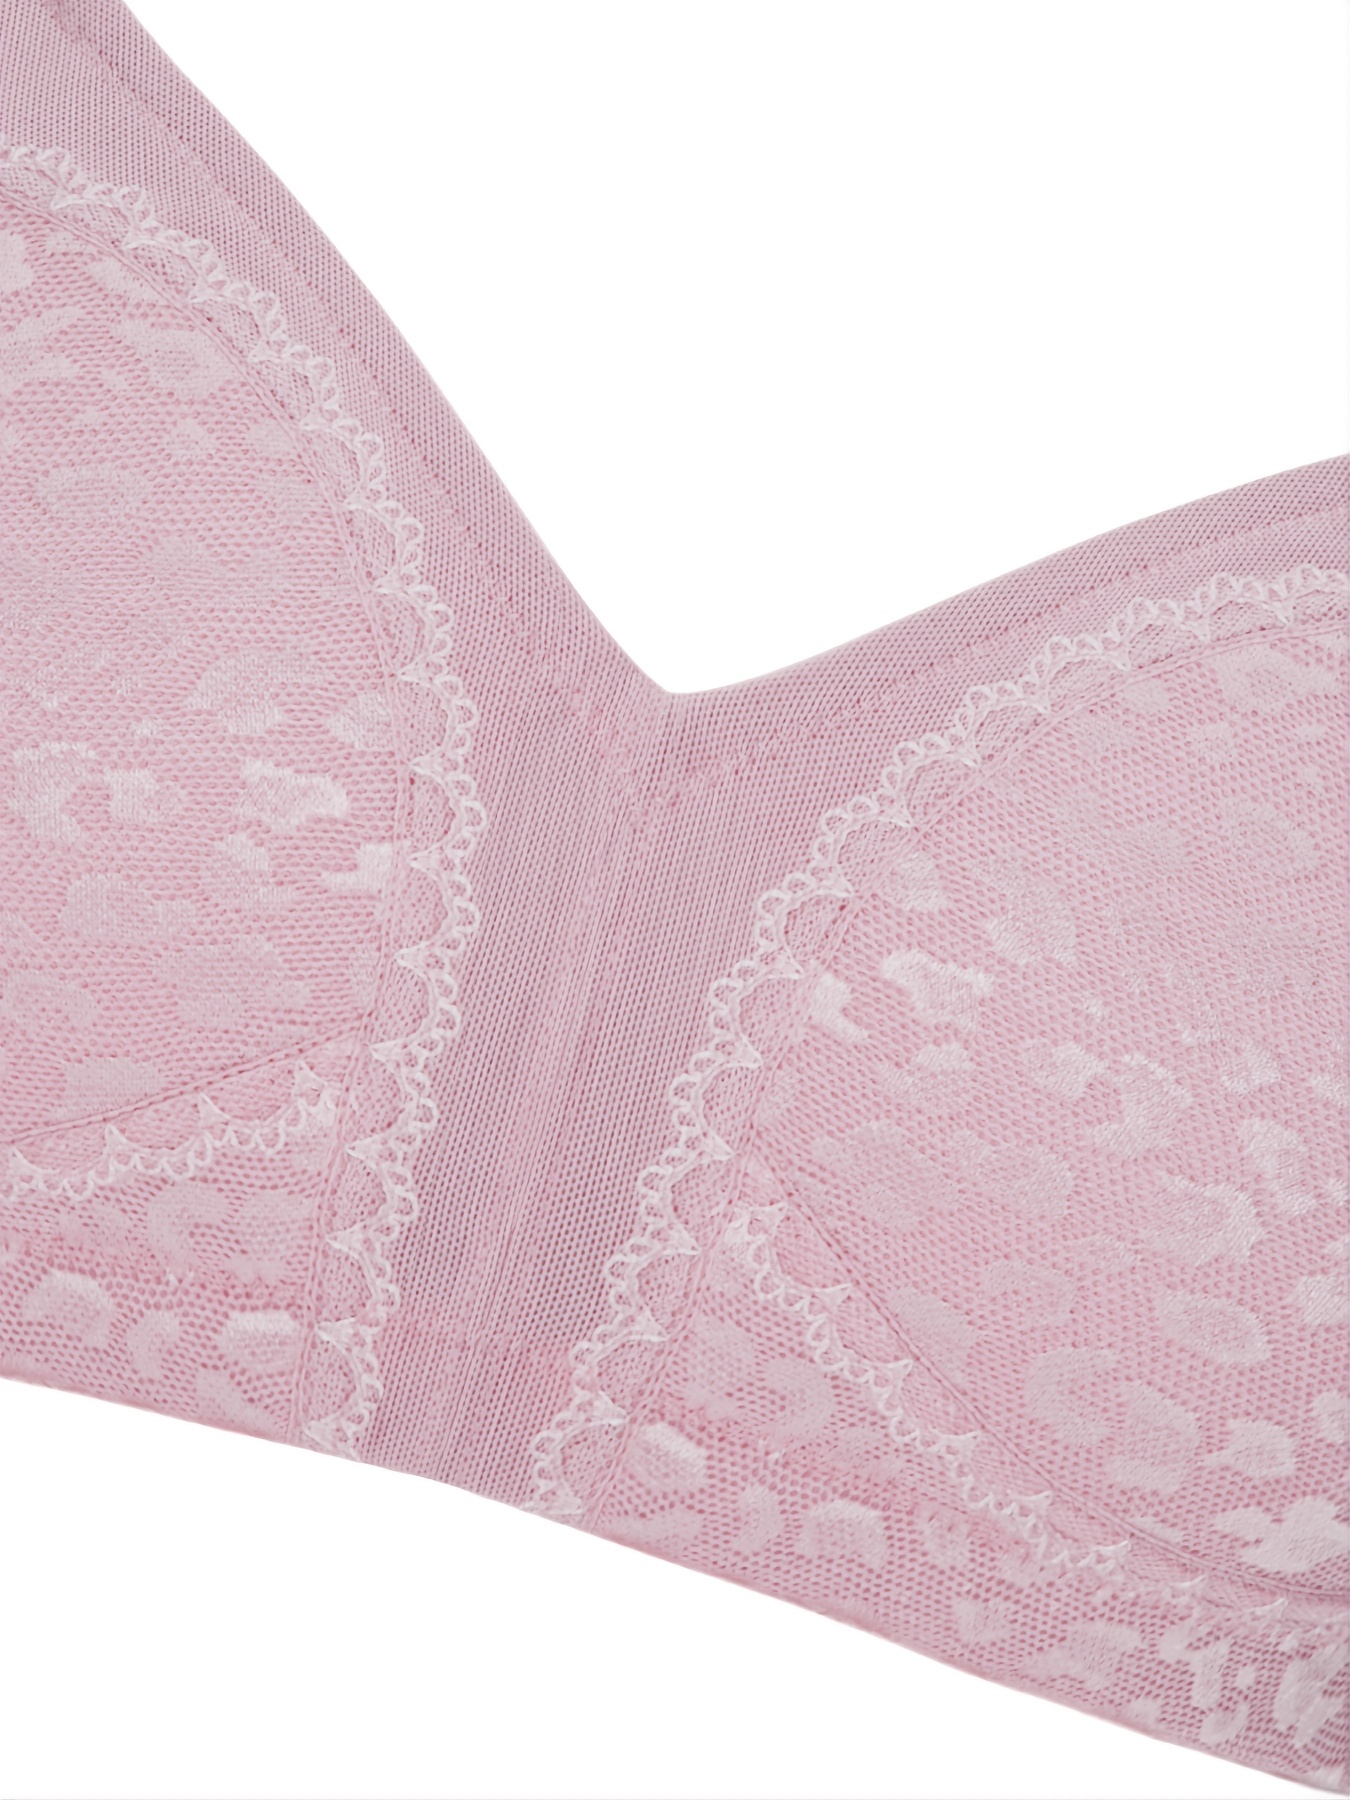 Plus Size Pink Seamless Lace Padded Non-Wired Bralette